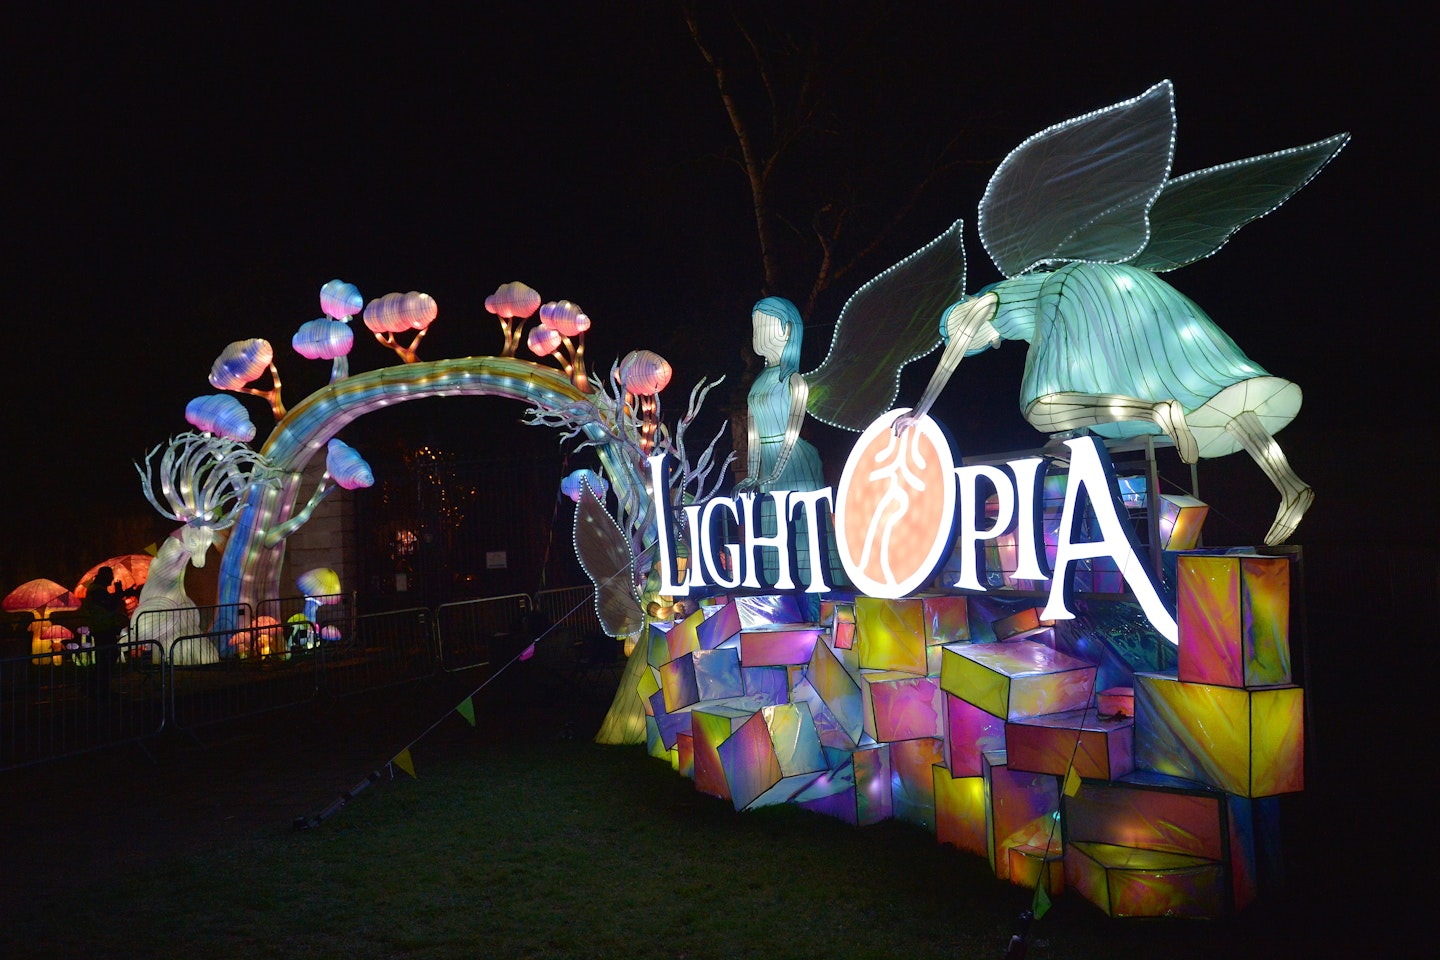 If in London or Manchester, go to Lightopia